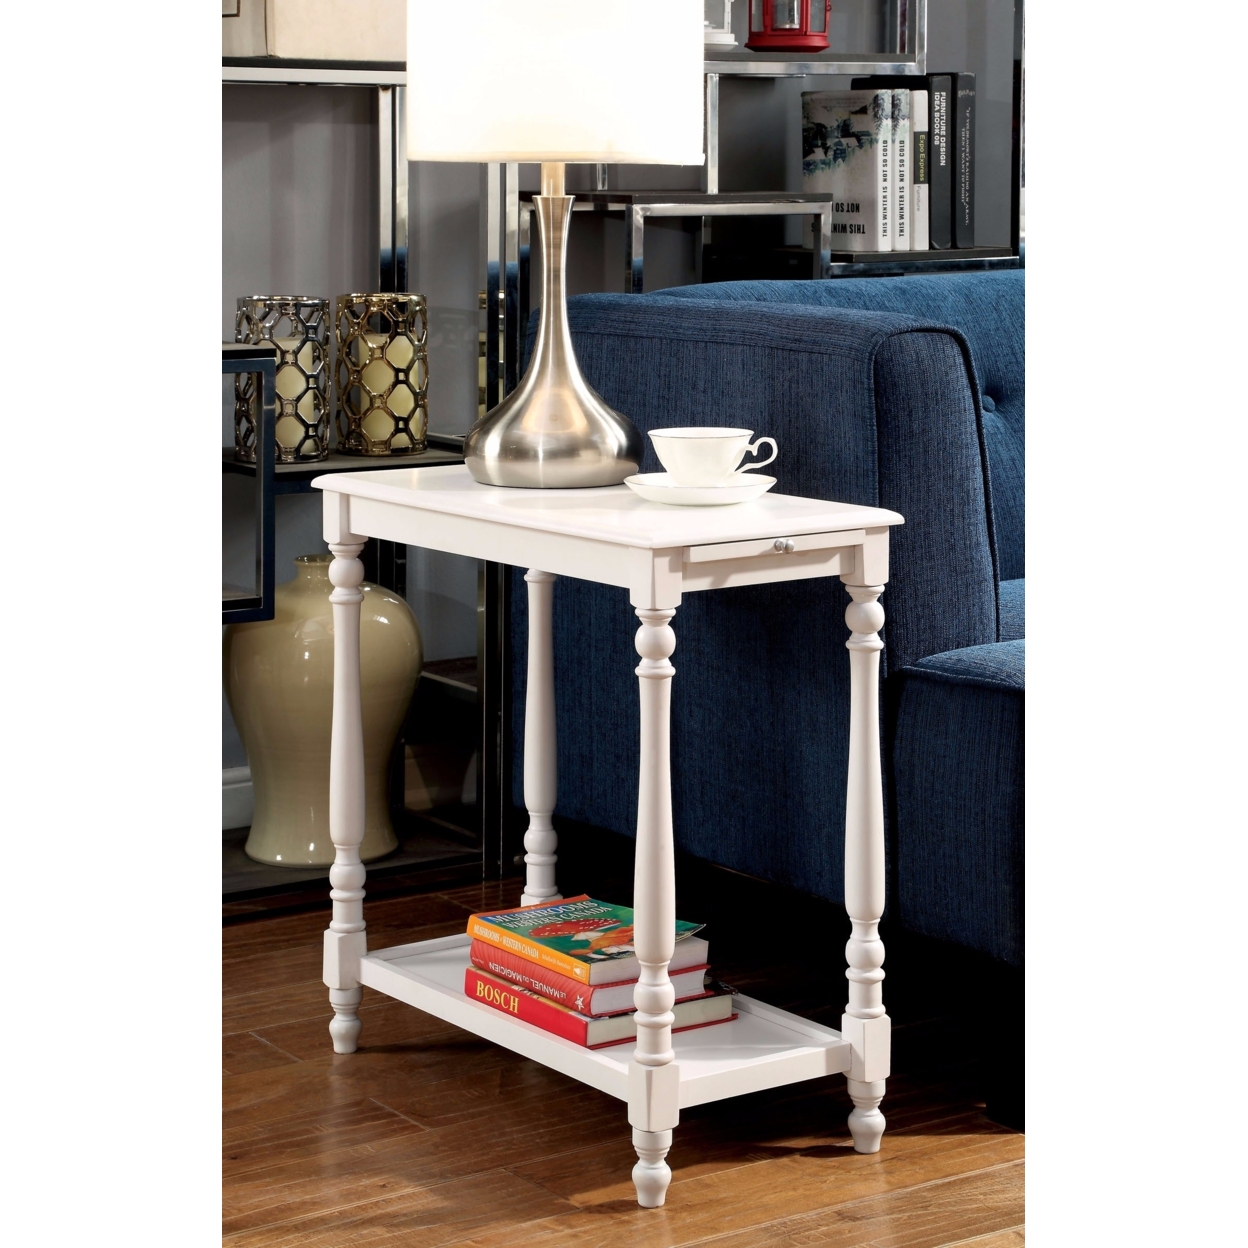 Wooden Side Table With Turned Legs And Open Shelf, White- Saltoro Sherpi